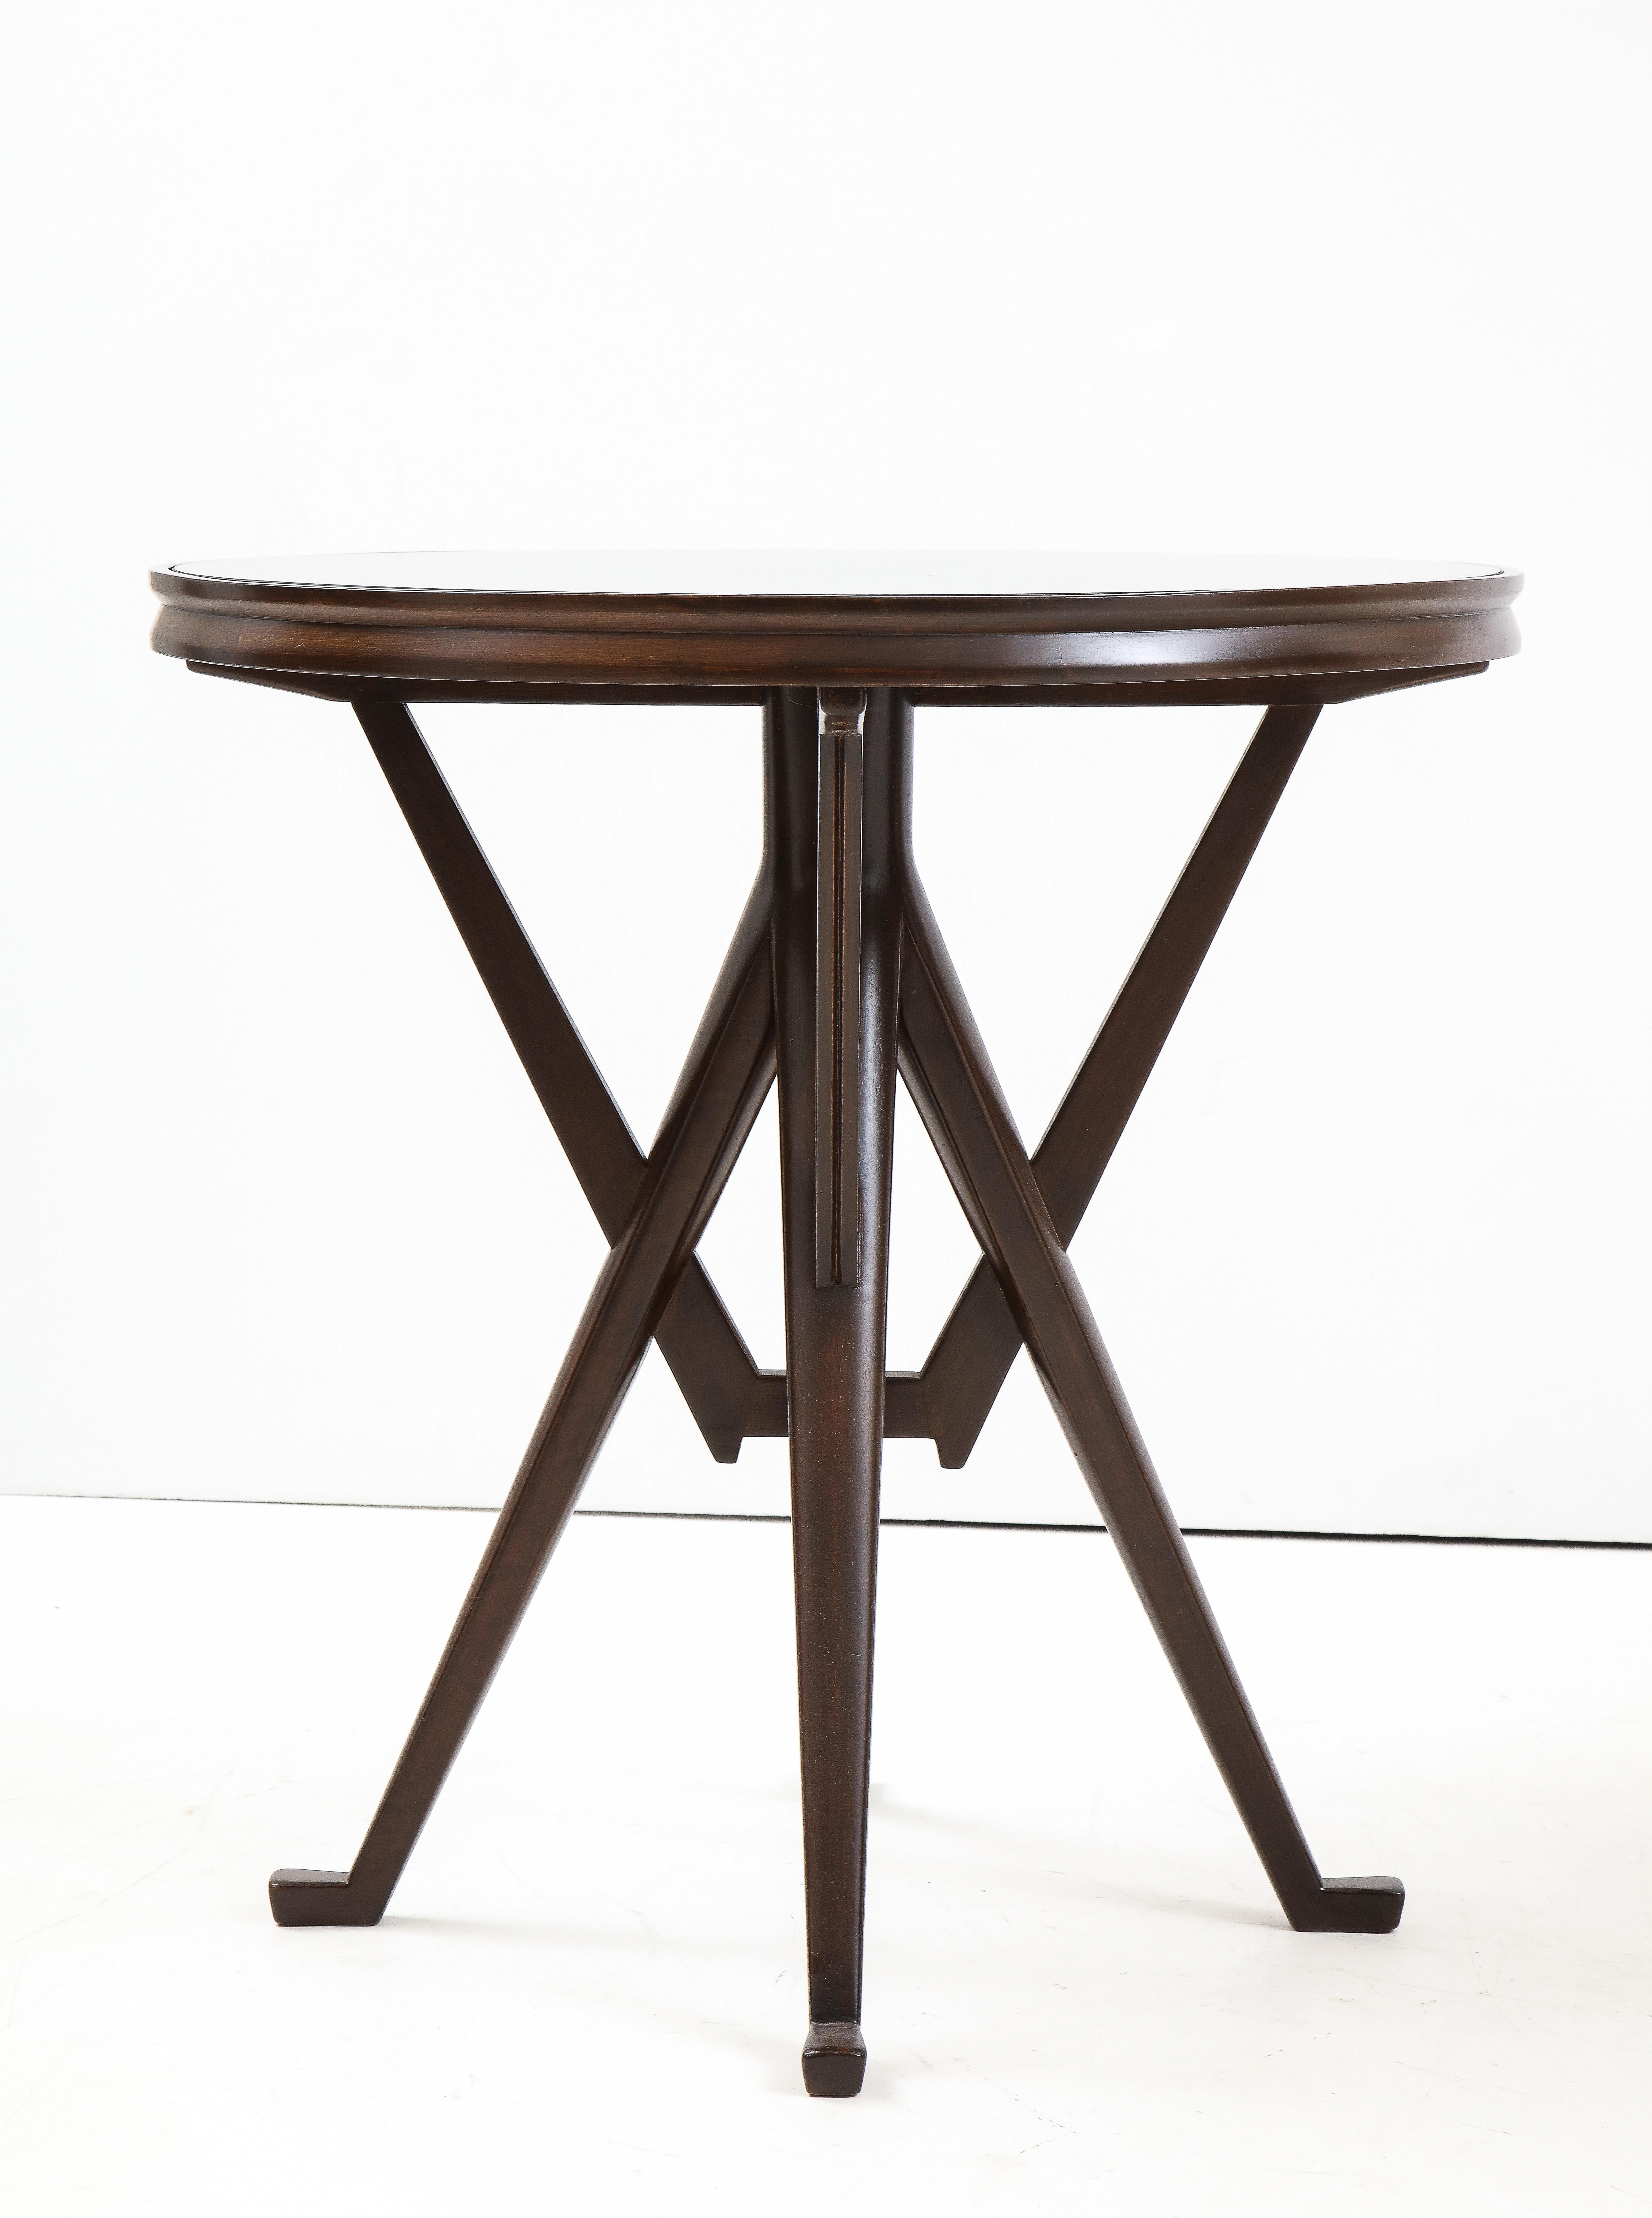 Mid-20th Century Pair of Italian Circular Wood and Glass Tables Attributed to Ico Parisi